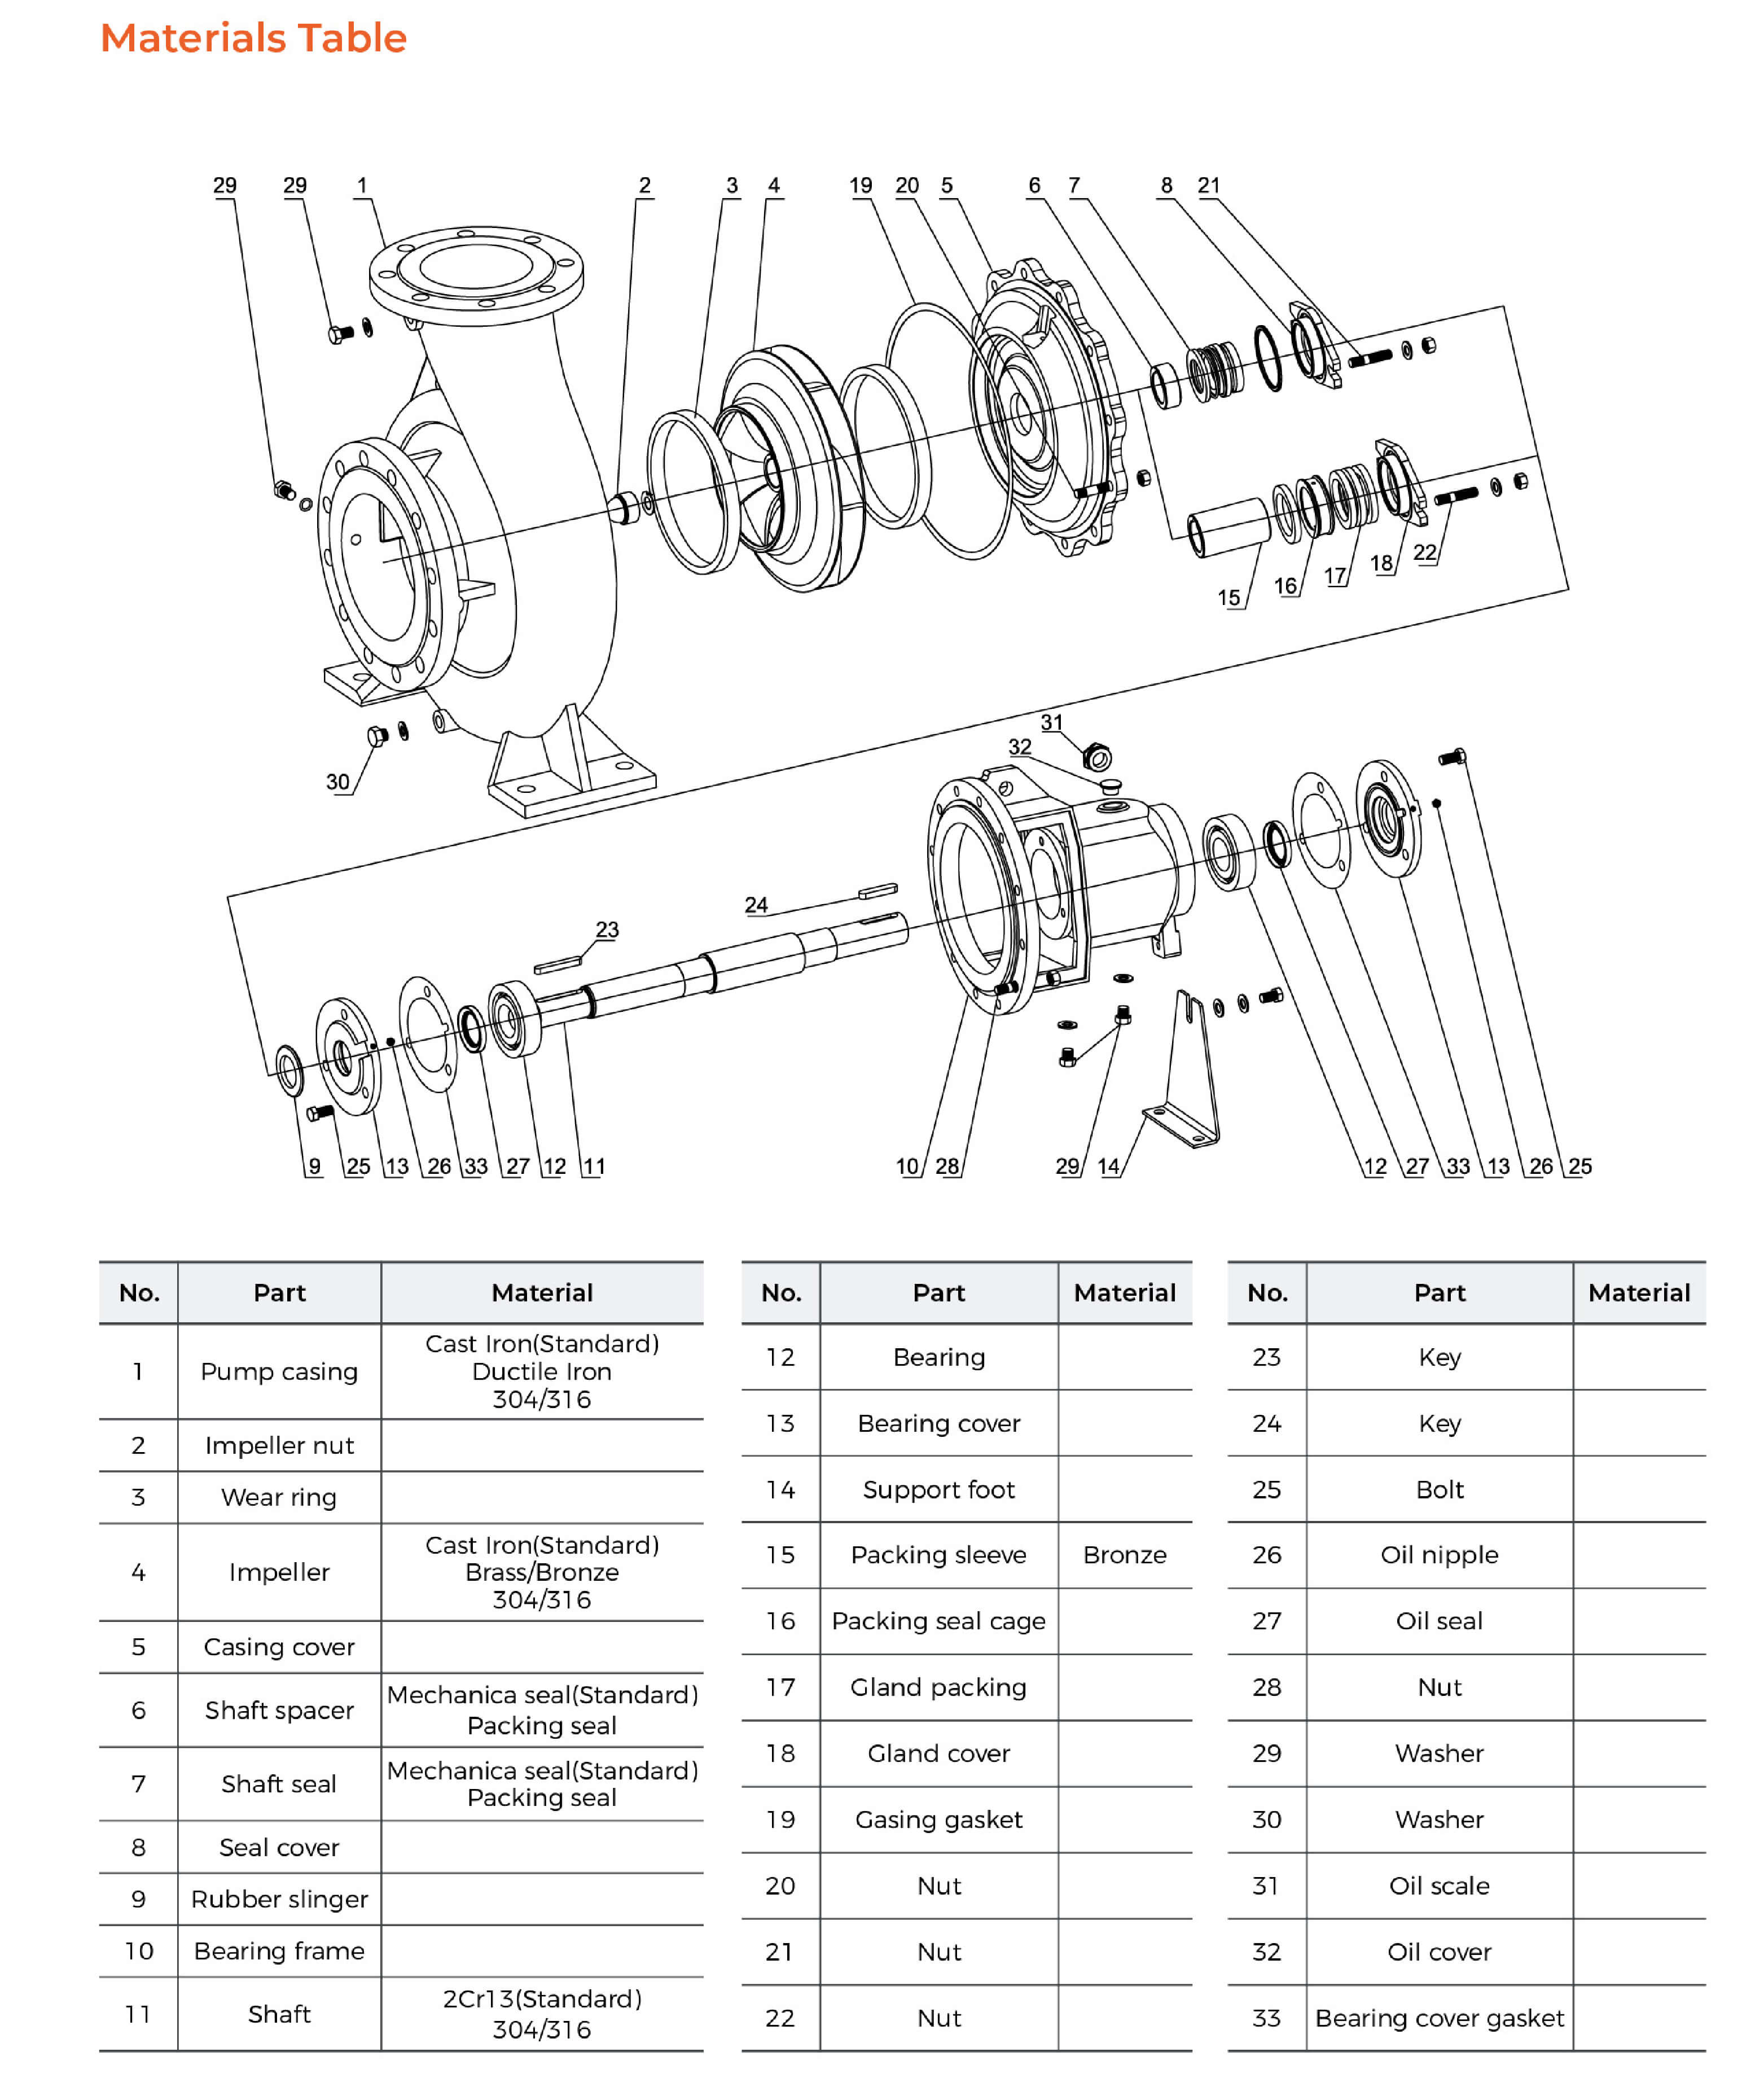 LEP End Suction Centrifugal Pump Material Table